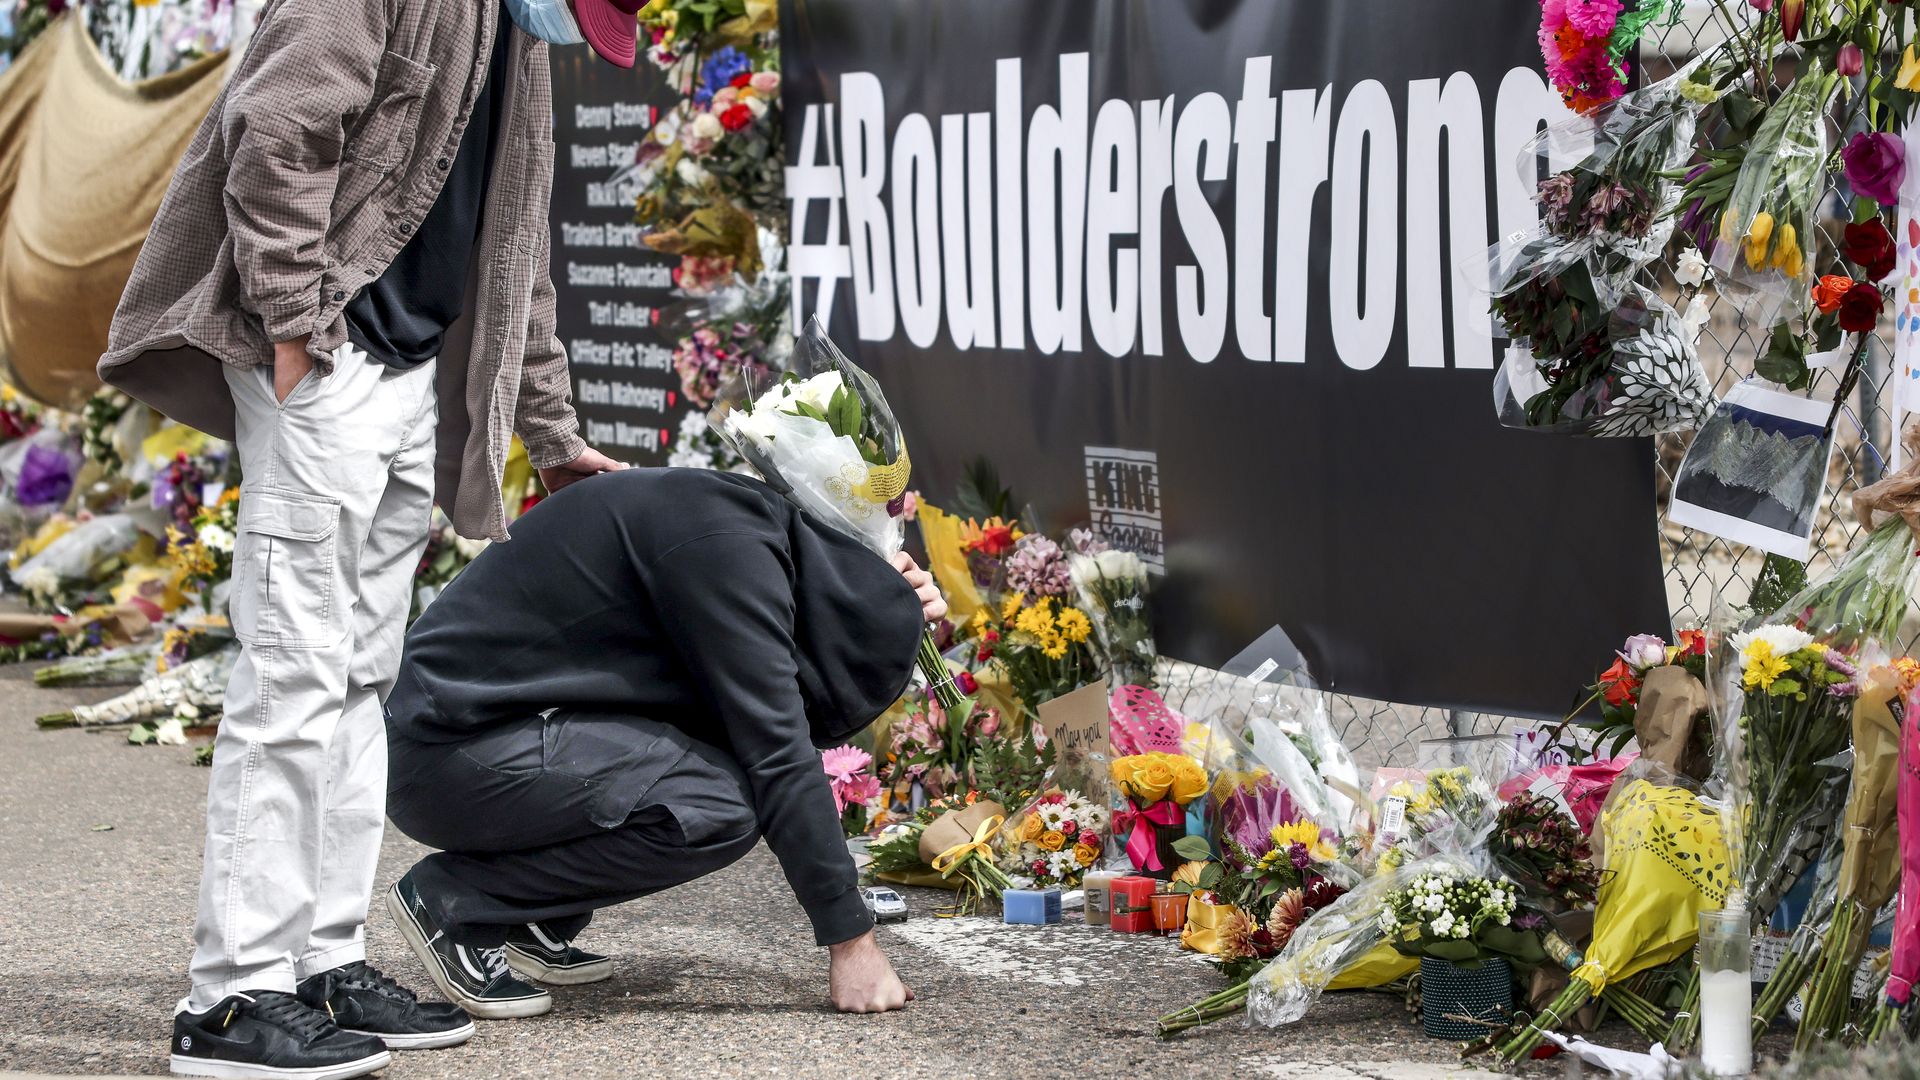 Photo of a person kneeling in front of a memorial with flowers and a sign that says "#BoulderStrong" as another person stands behind them with a hand on their back